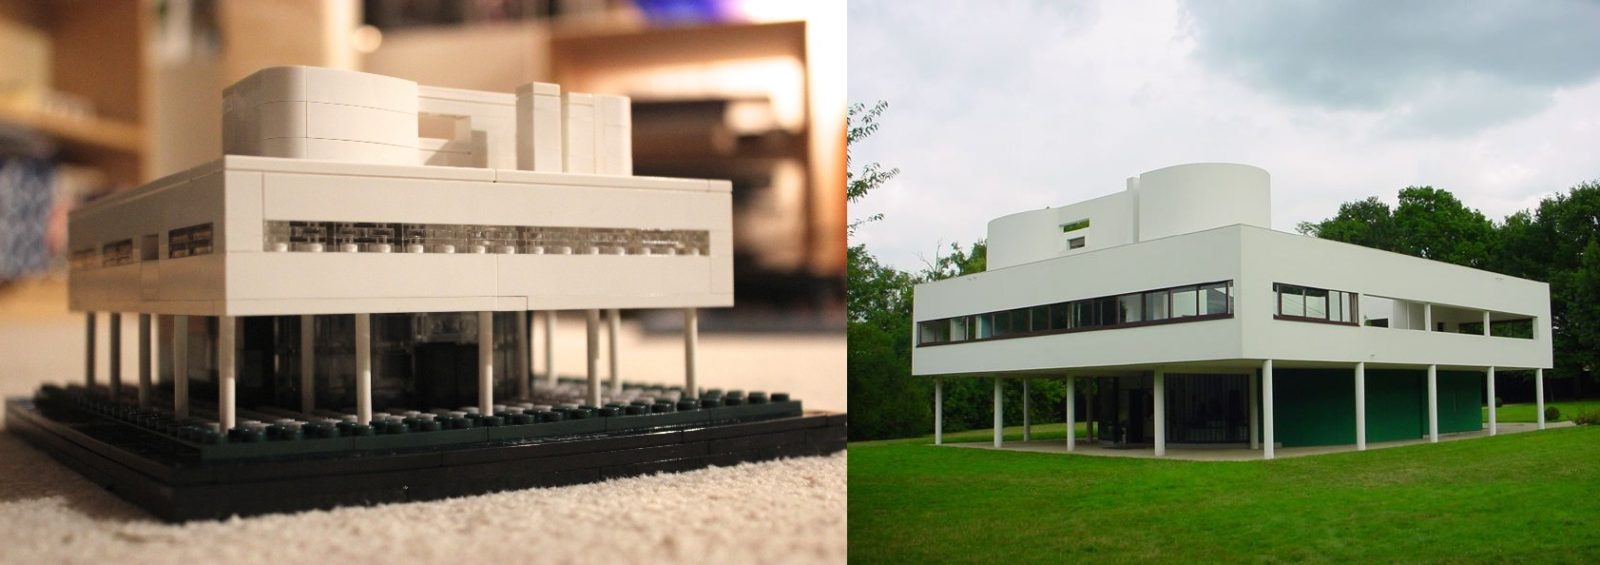 My LEGO Architecture collection is finally complete! : r/lego